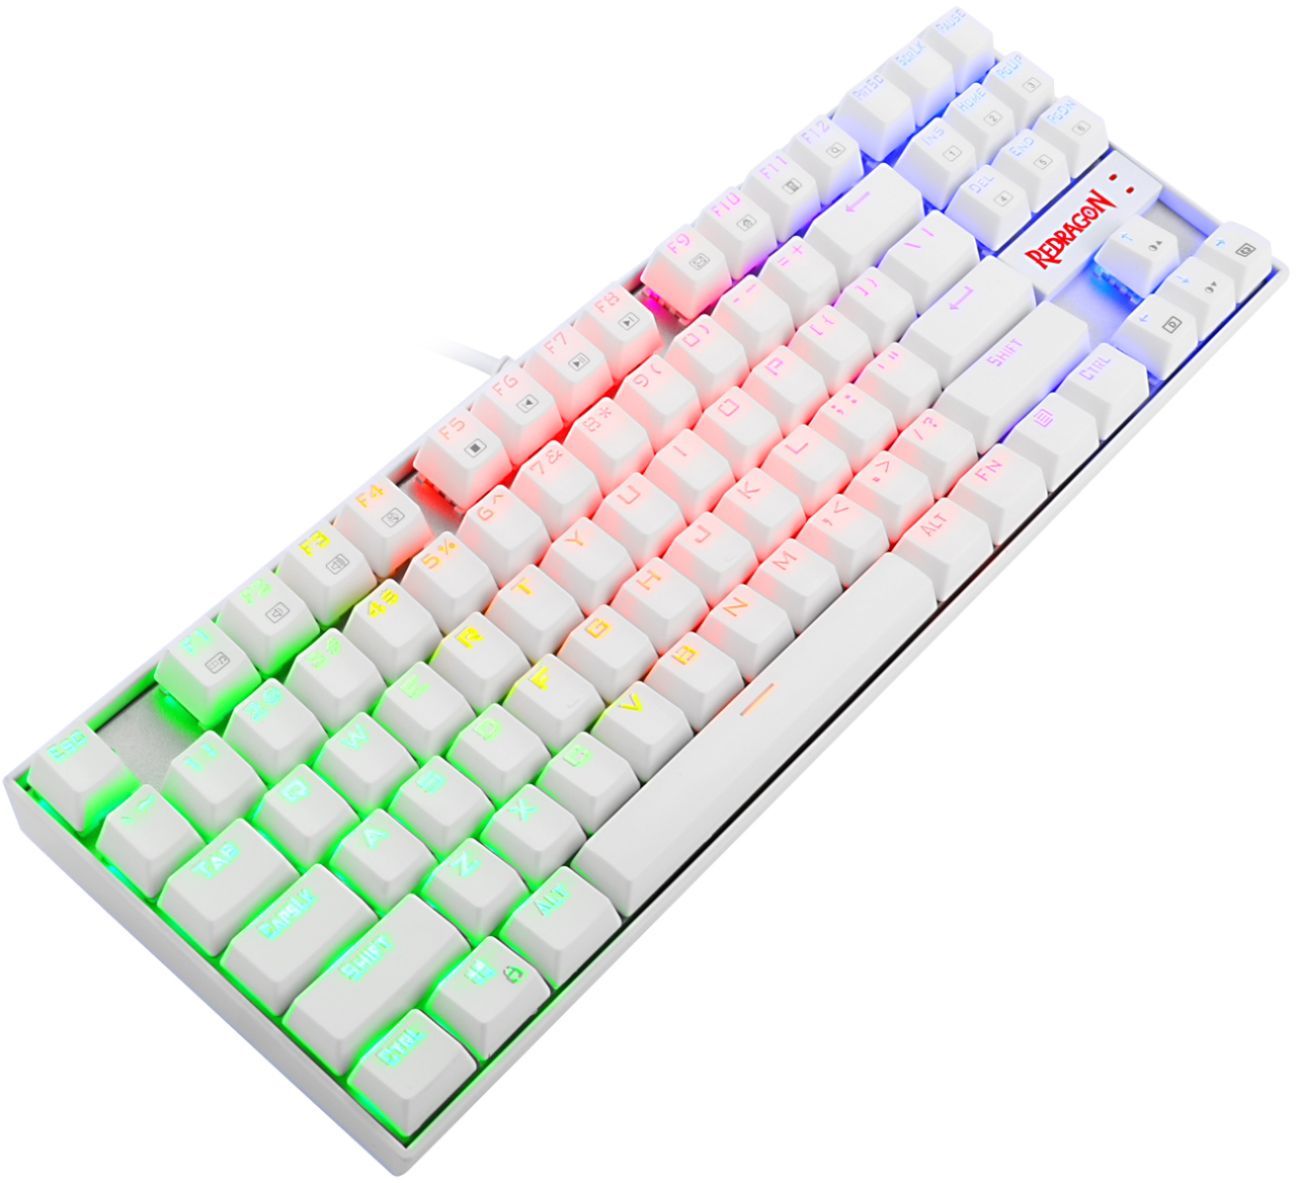 Redragon K552W Kumara White Mechanical Gaming Keyboard RGB LED Backlit Wired with Anti-Dust Proof Switches for Windows PC White, 87 Key Blue Switches